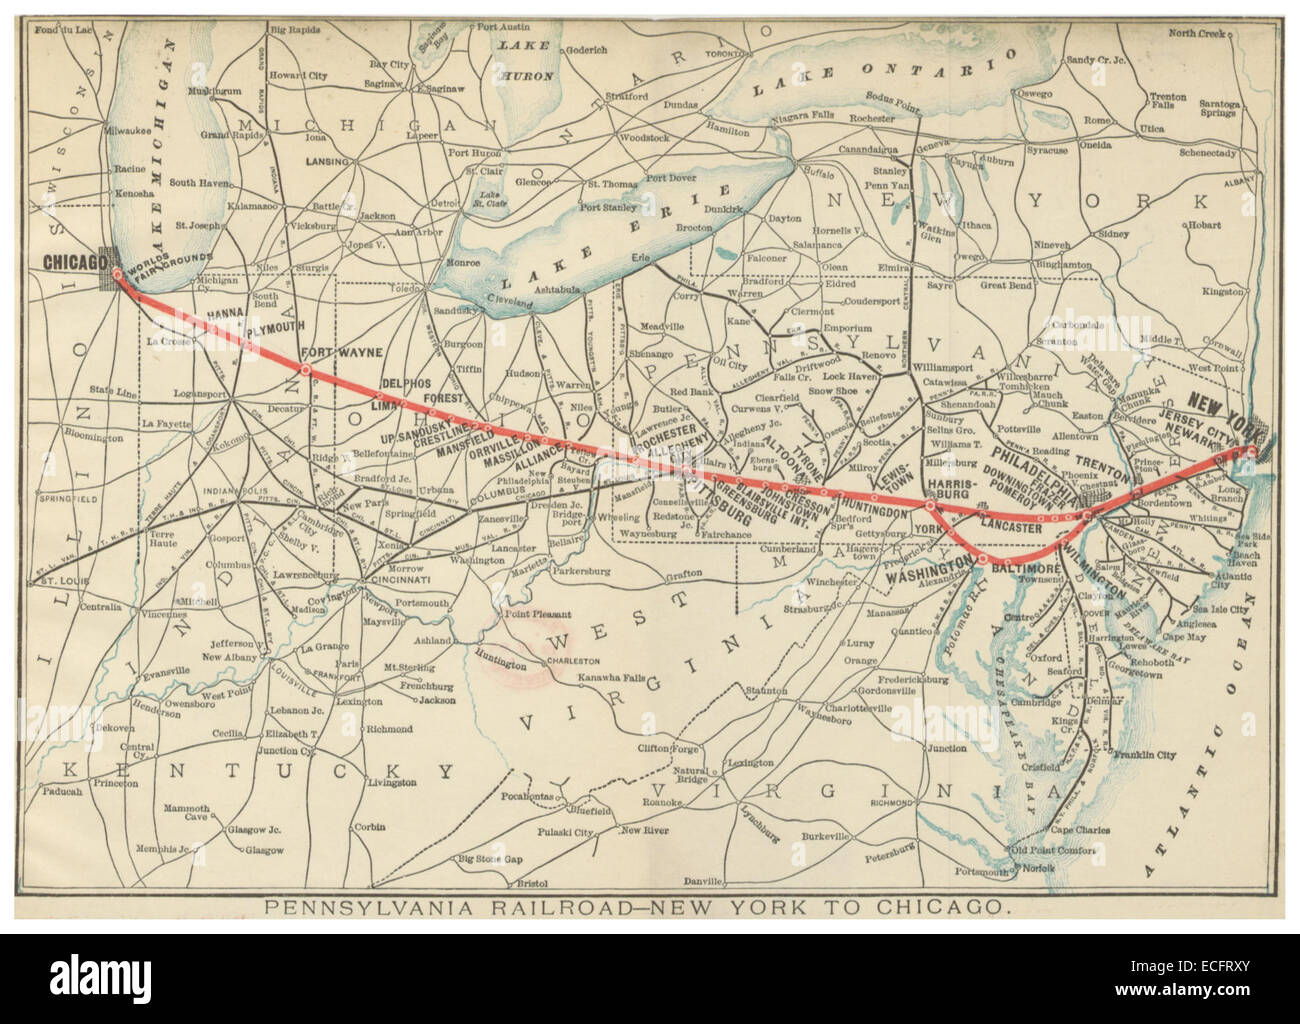 PRR(1893) Railroad Lines NEW YORK TO CHICAGO Stock Photo